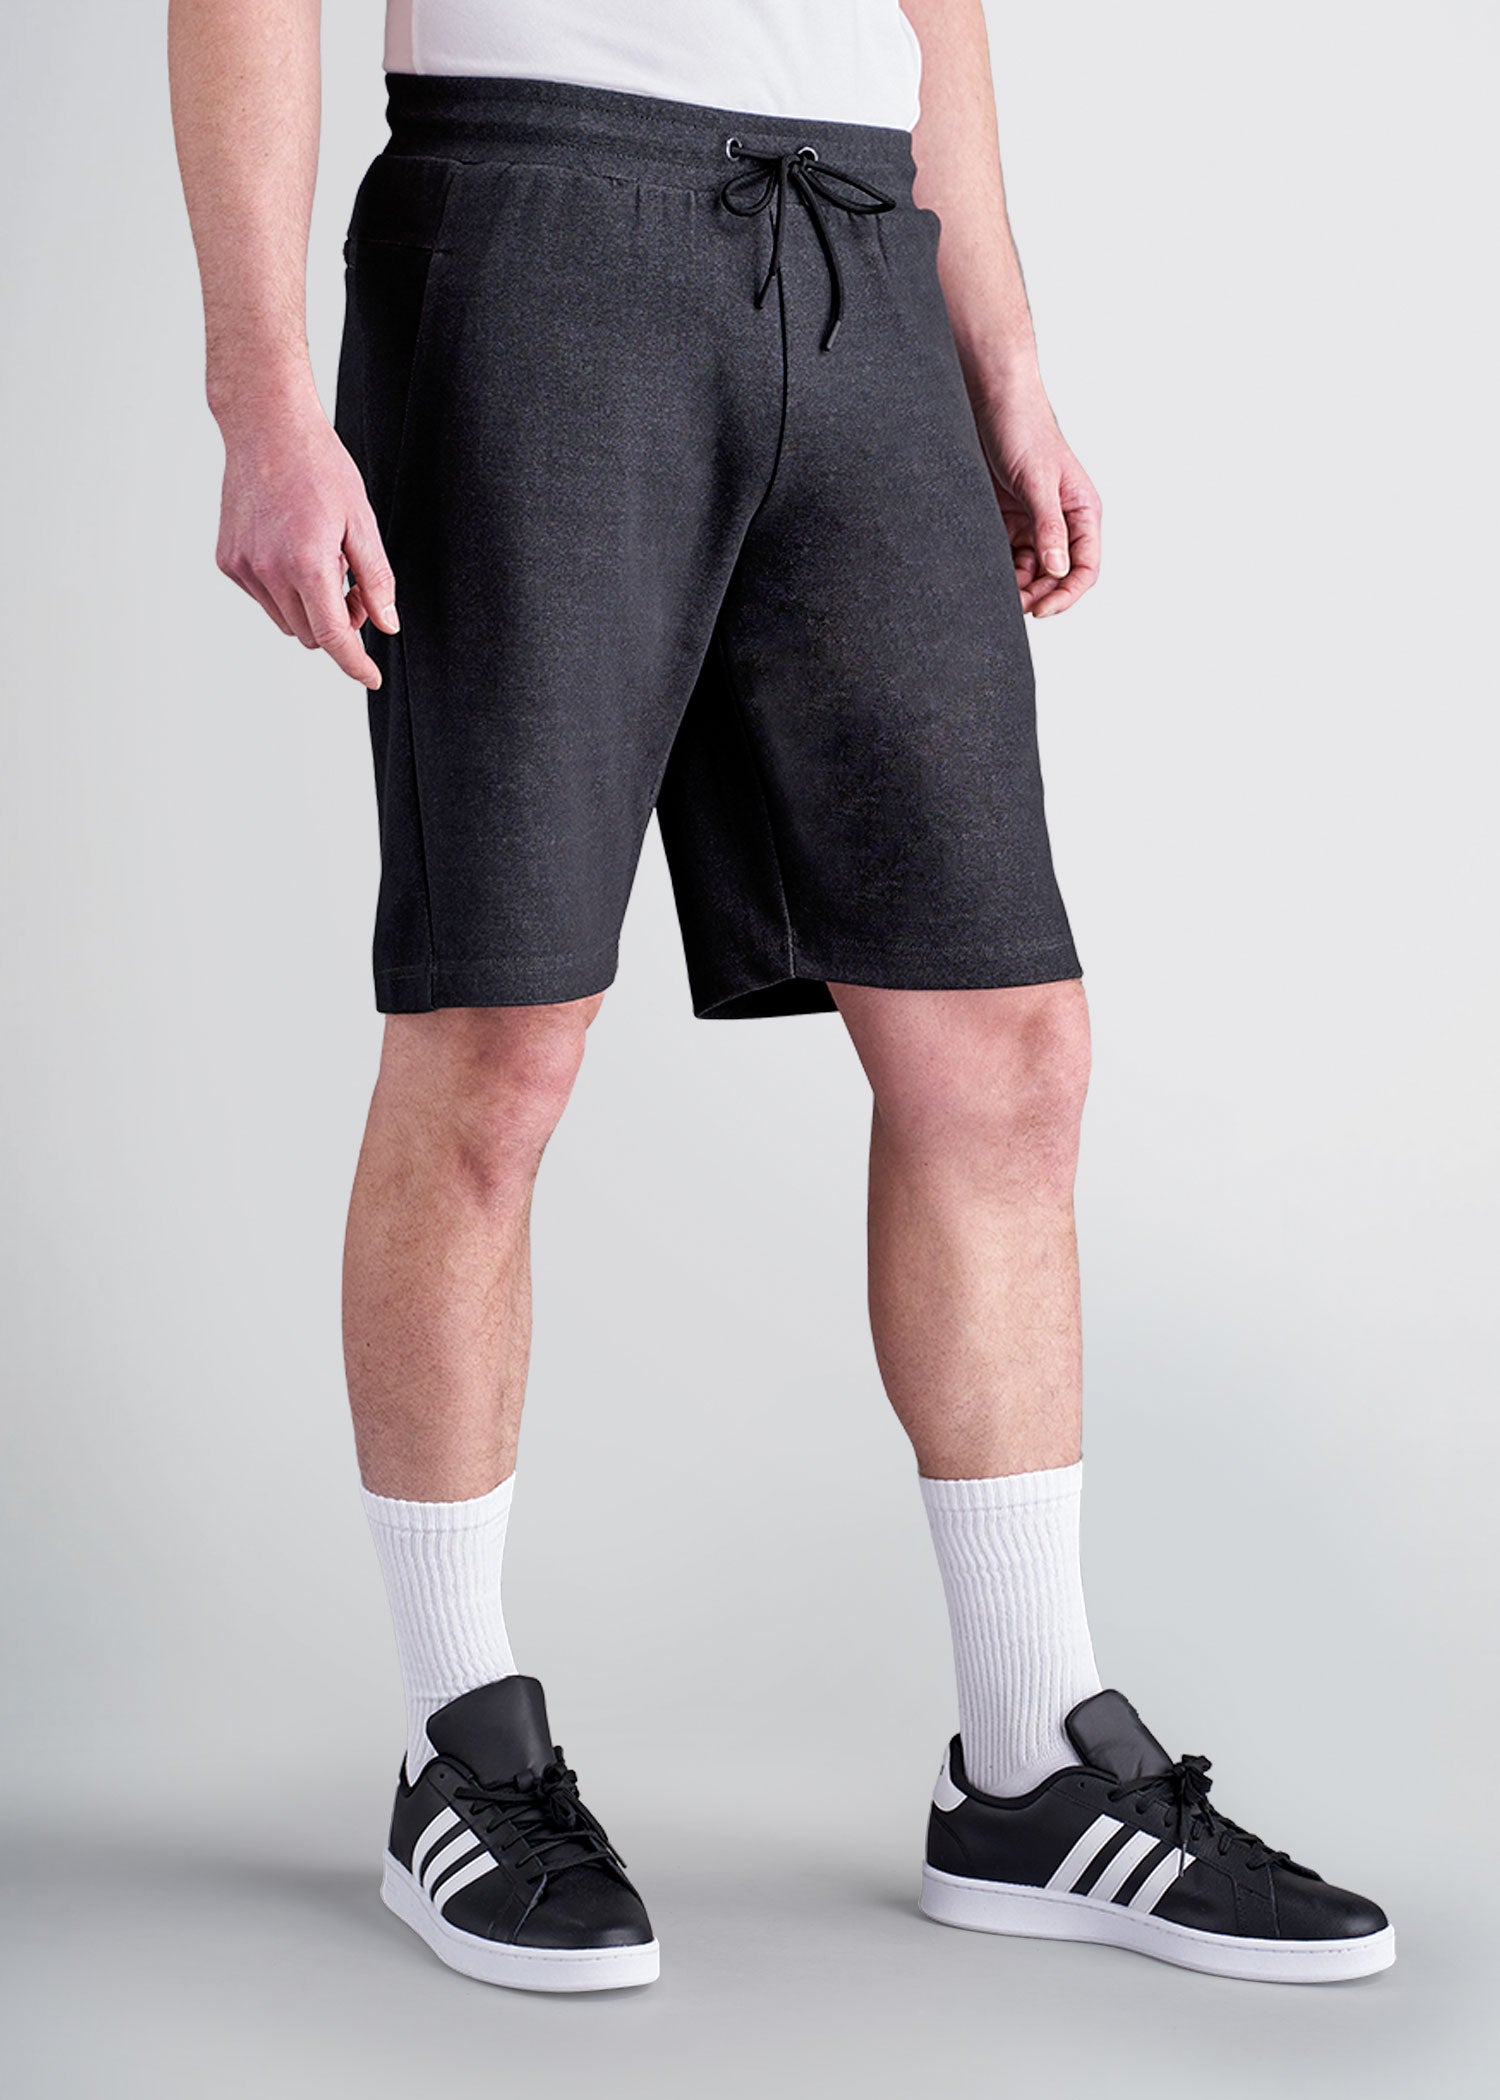 american-tall-mens-knit-athletic-shorts-charcoal-front